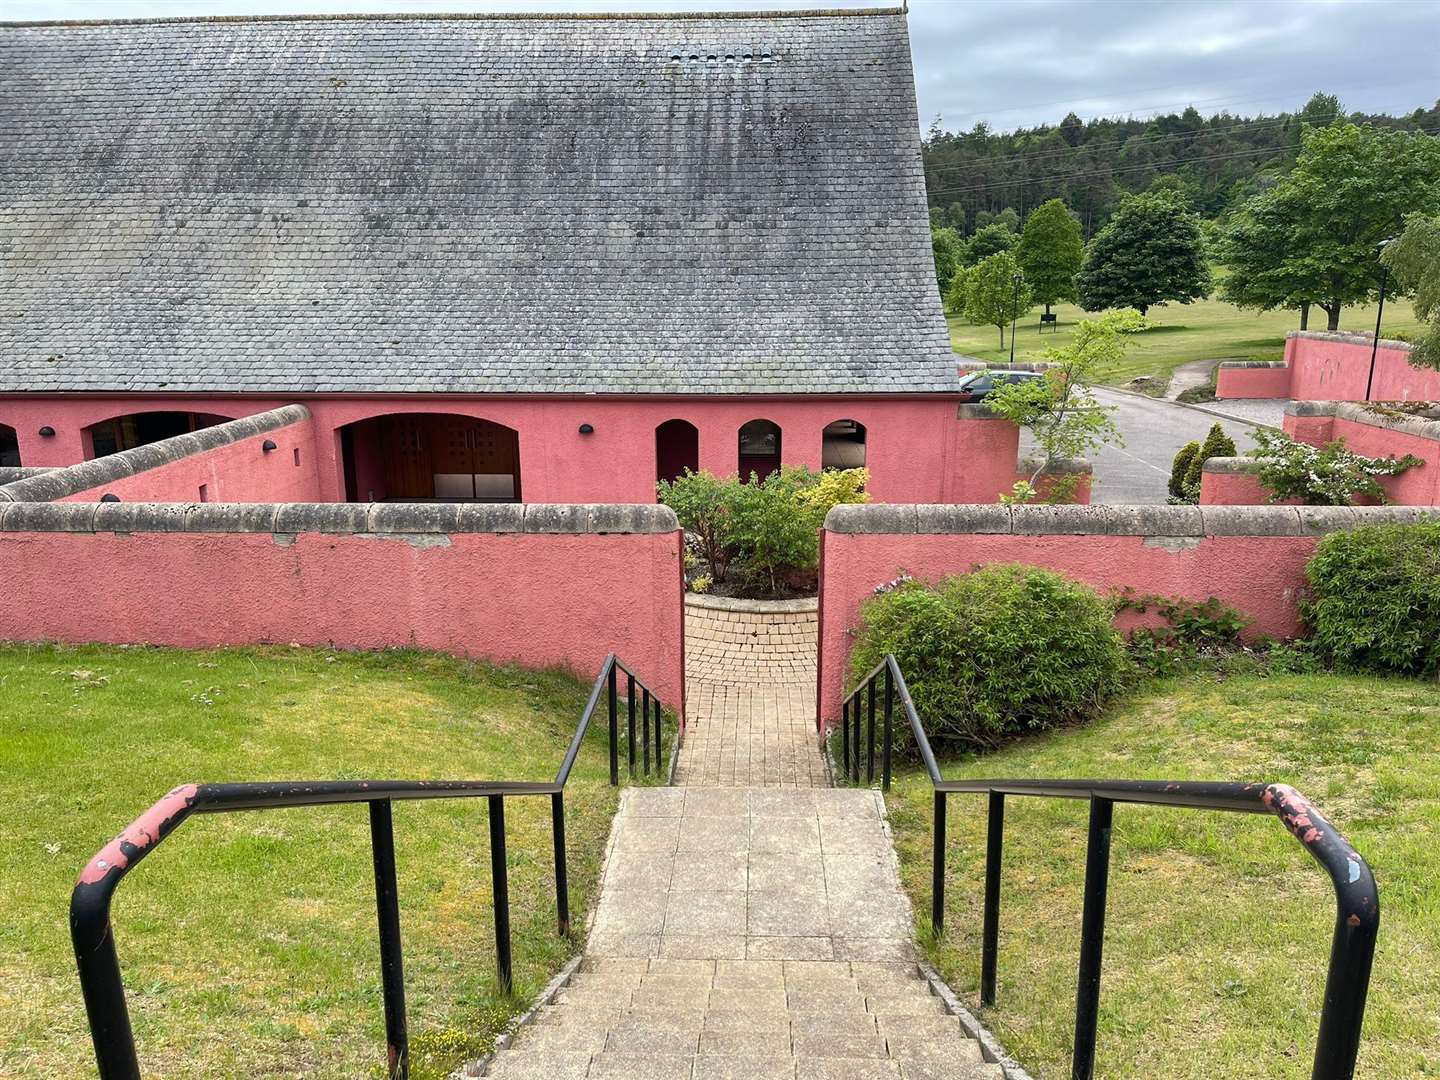 Kilvean Cemetery's crematorium building and grounds was criticised by Cllr Duncan Macpherson.